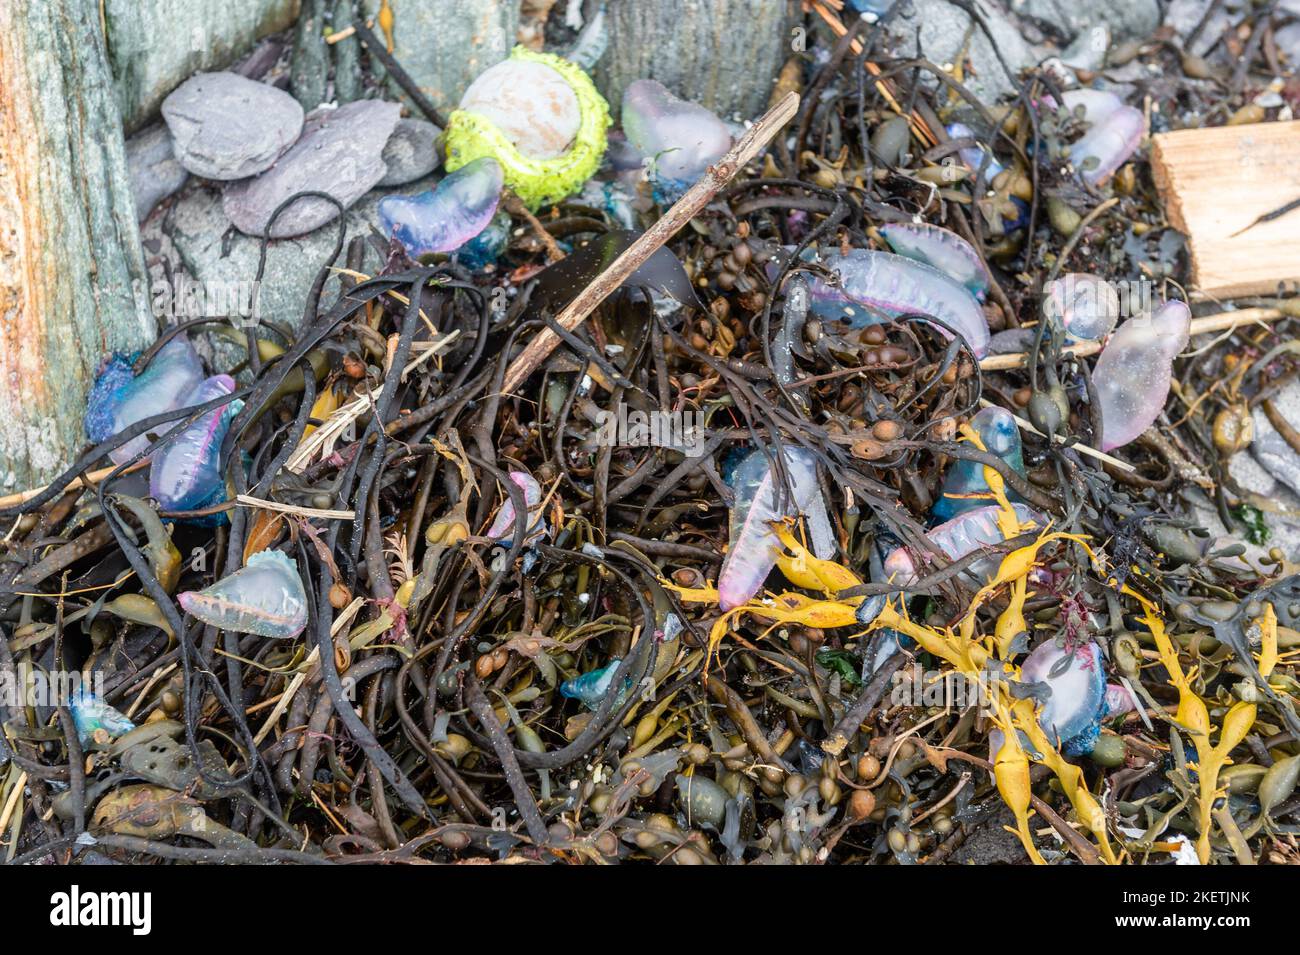 Tragumna, West Cork, Ireland. 14th Nov, 2022. Well over 100 Portugeuese man o' war (Physalia physalis) have been washed up on the beach at Tragumna. The animal, also commonly known as a blue bottle, can deliver a painful sting which is fatal to some animals and has been known to occasionally kill humans. Credit: AG News/Alamy Live News Stock Photo